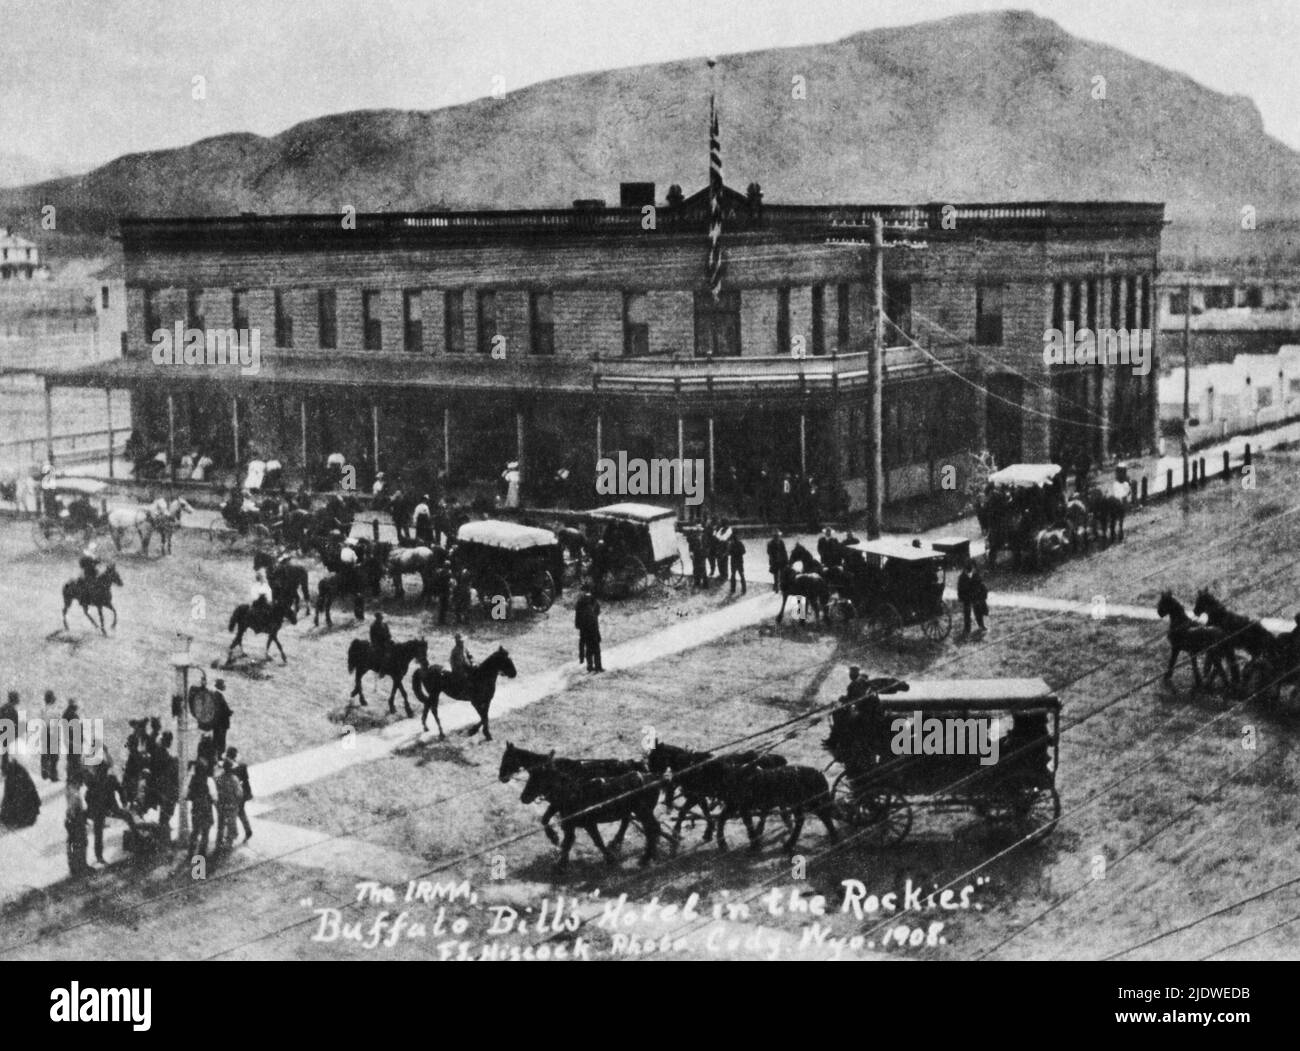 1902 , Cody , Wyoming , USA  : Colonel William Frederick CODY , know as  BUFFALO BILL ( 1846 -1917  ) built the Hotel Irma ( Irma was the name of her daughter ) after his fortune with Barnum Circus and the Wild West Show  - Epopea del Selvaggio WEST - cowboy - cow-boy -     ----  Archivio GBB Stock Photo